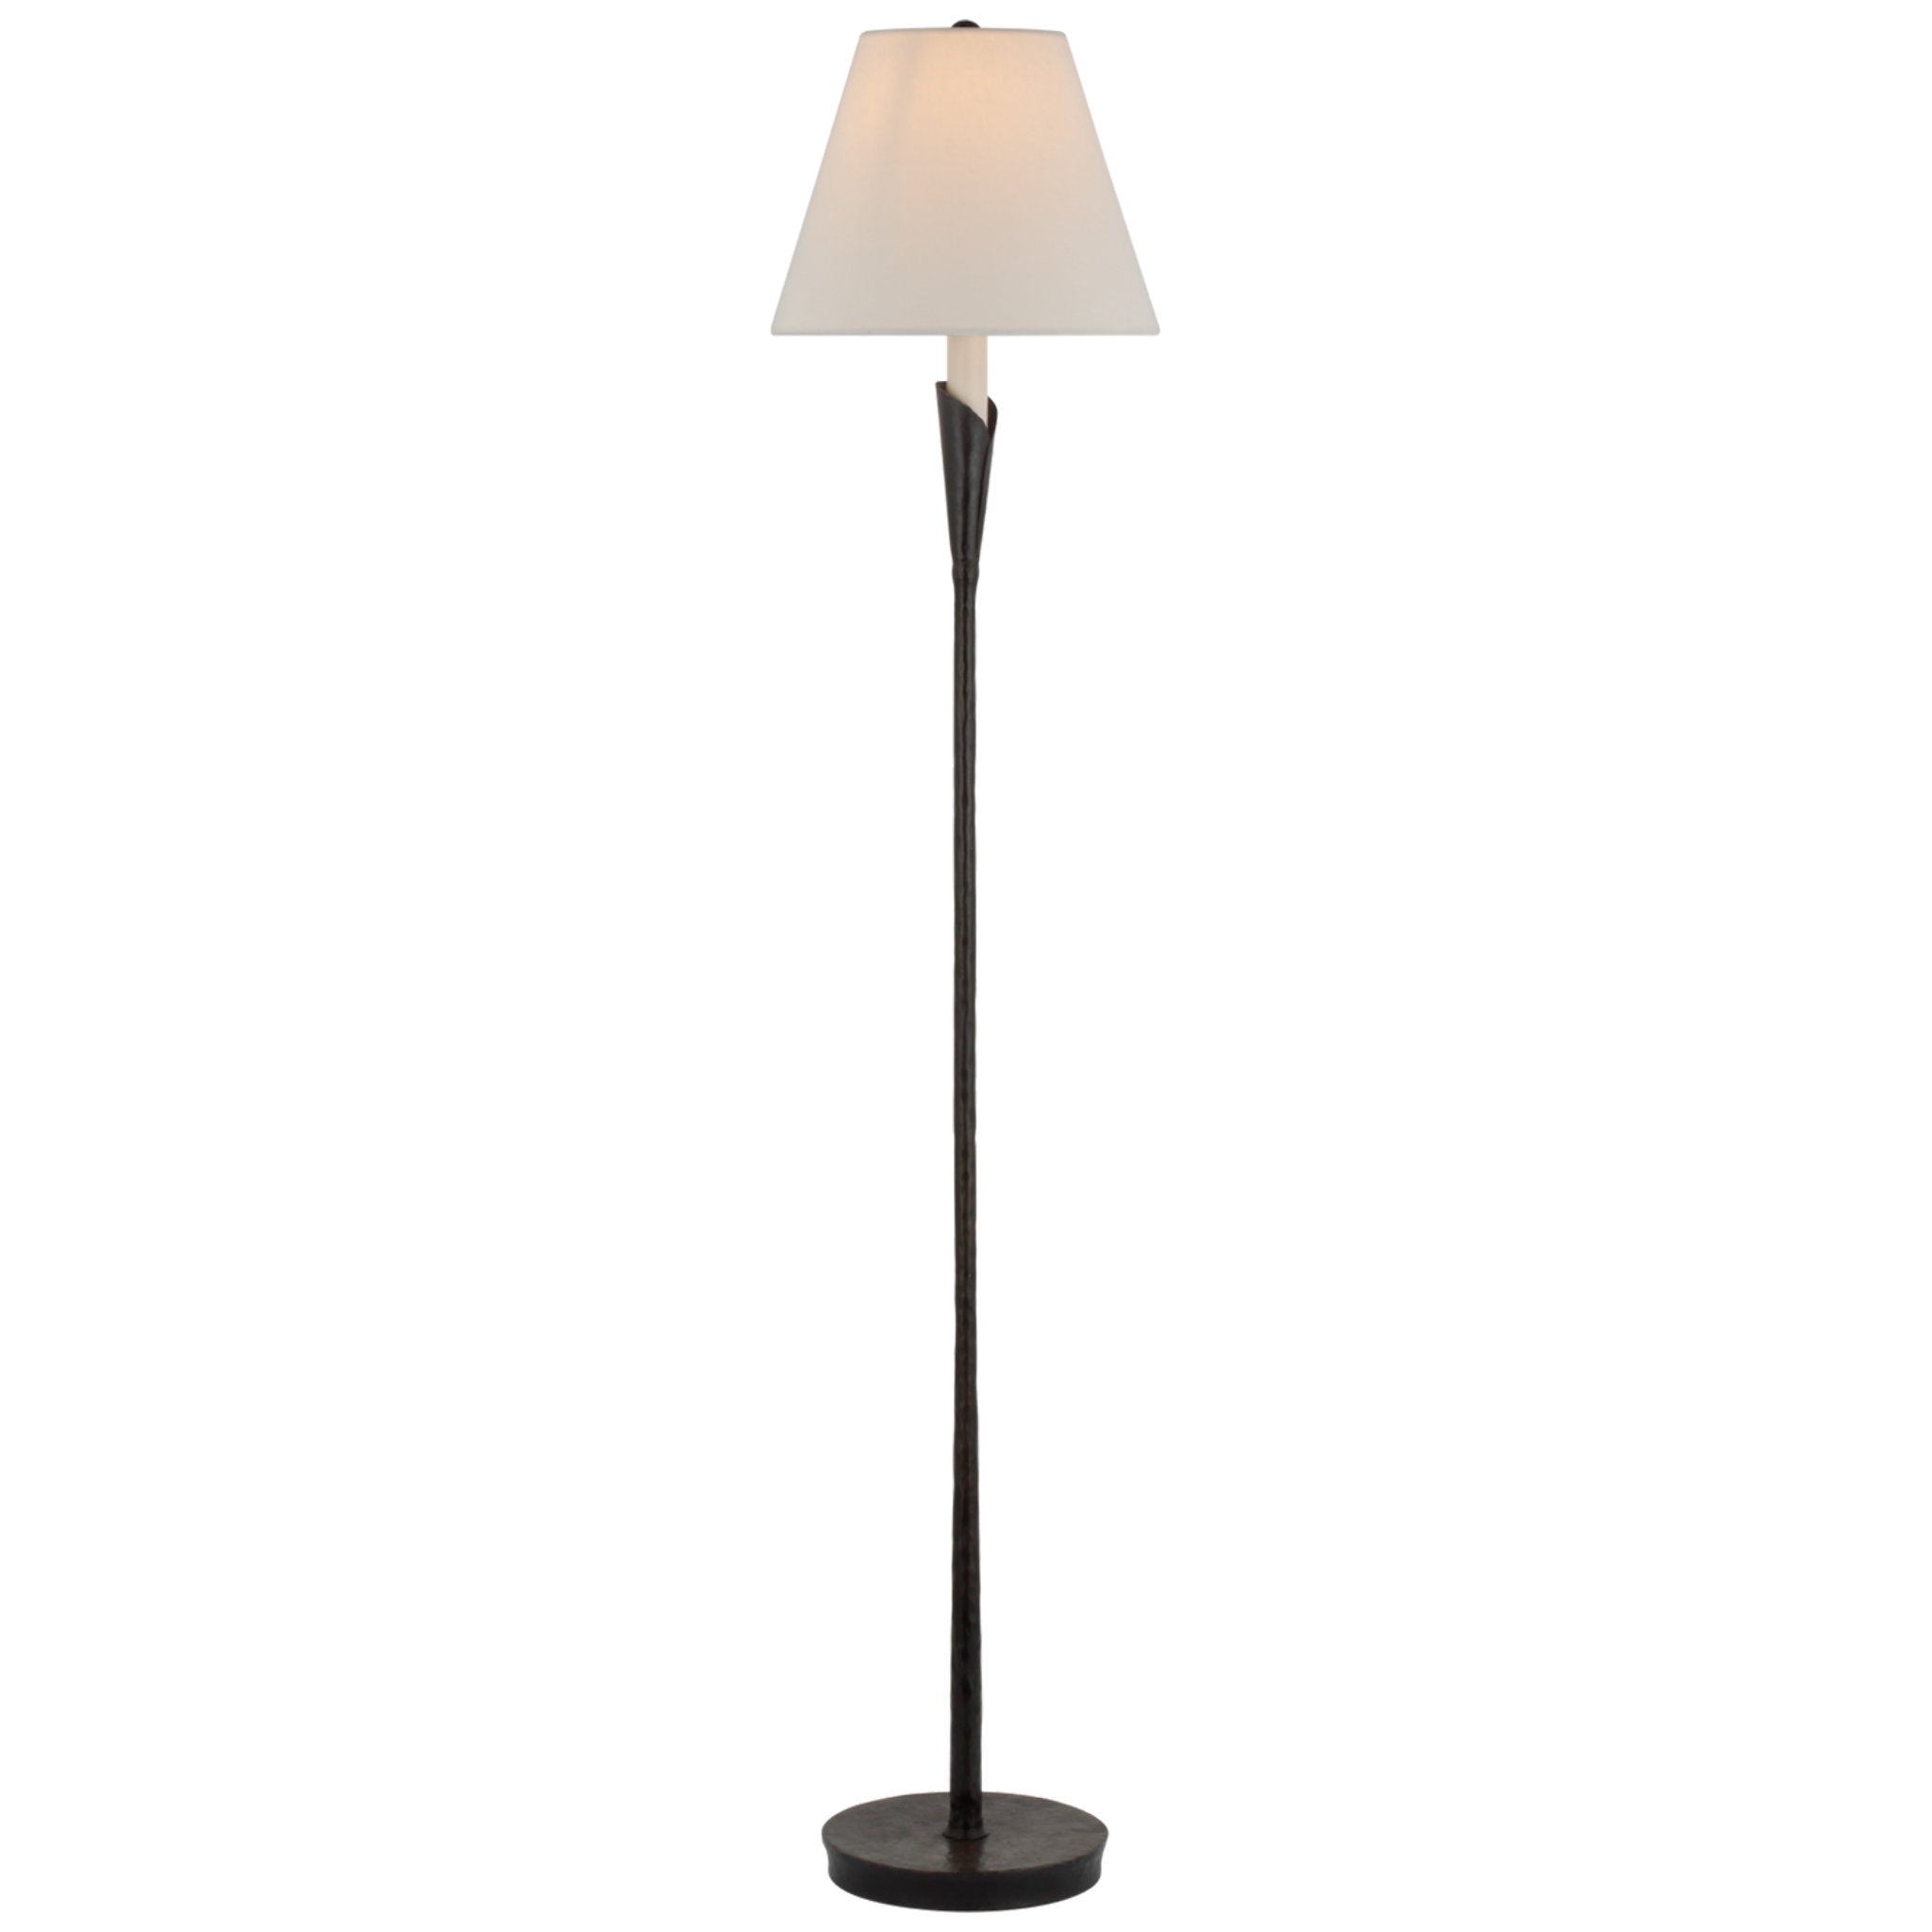 Chapman & Myers Aiden Accent Floor Lamp in Aged Iron with Linen Shade